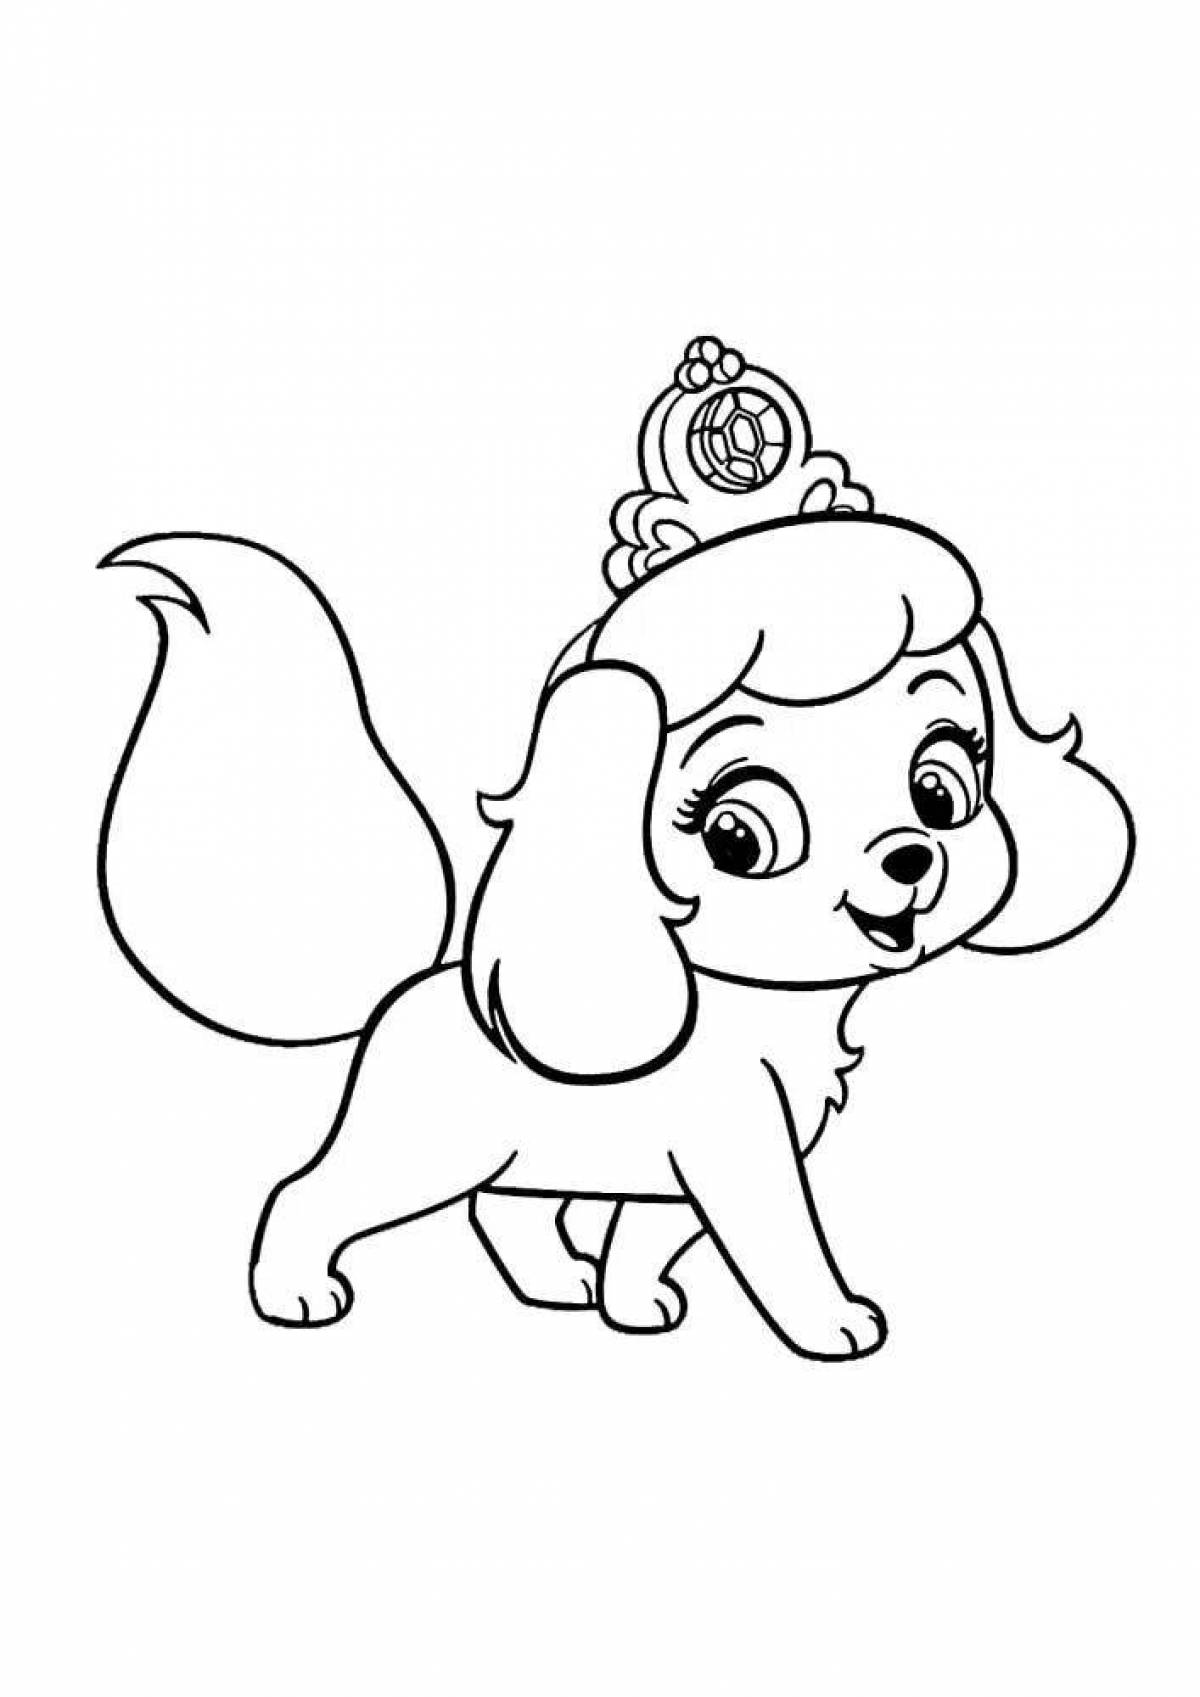 Dog with a bow #9